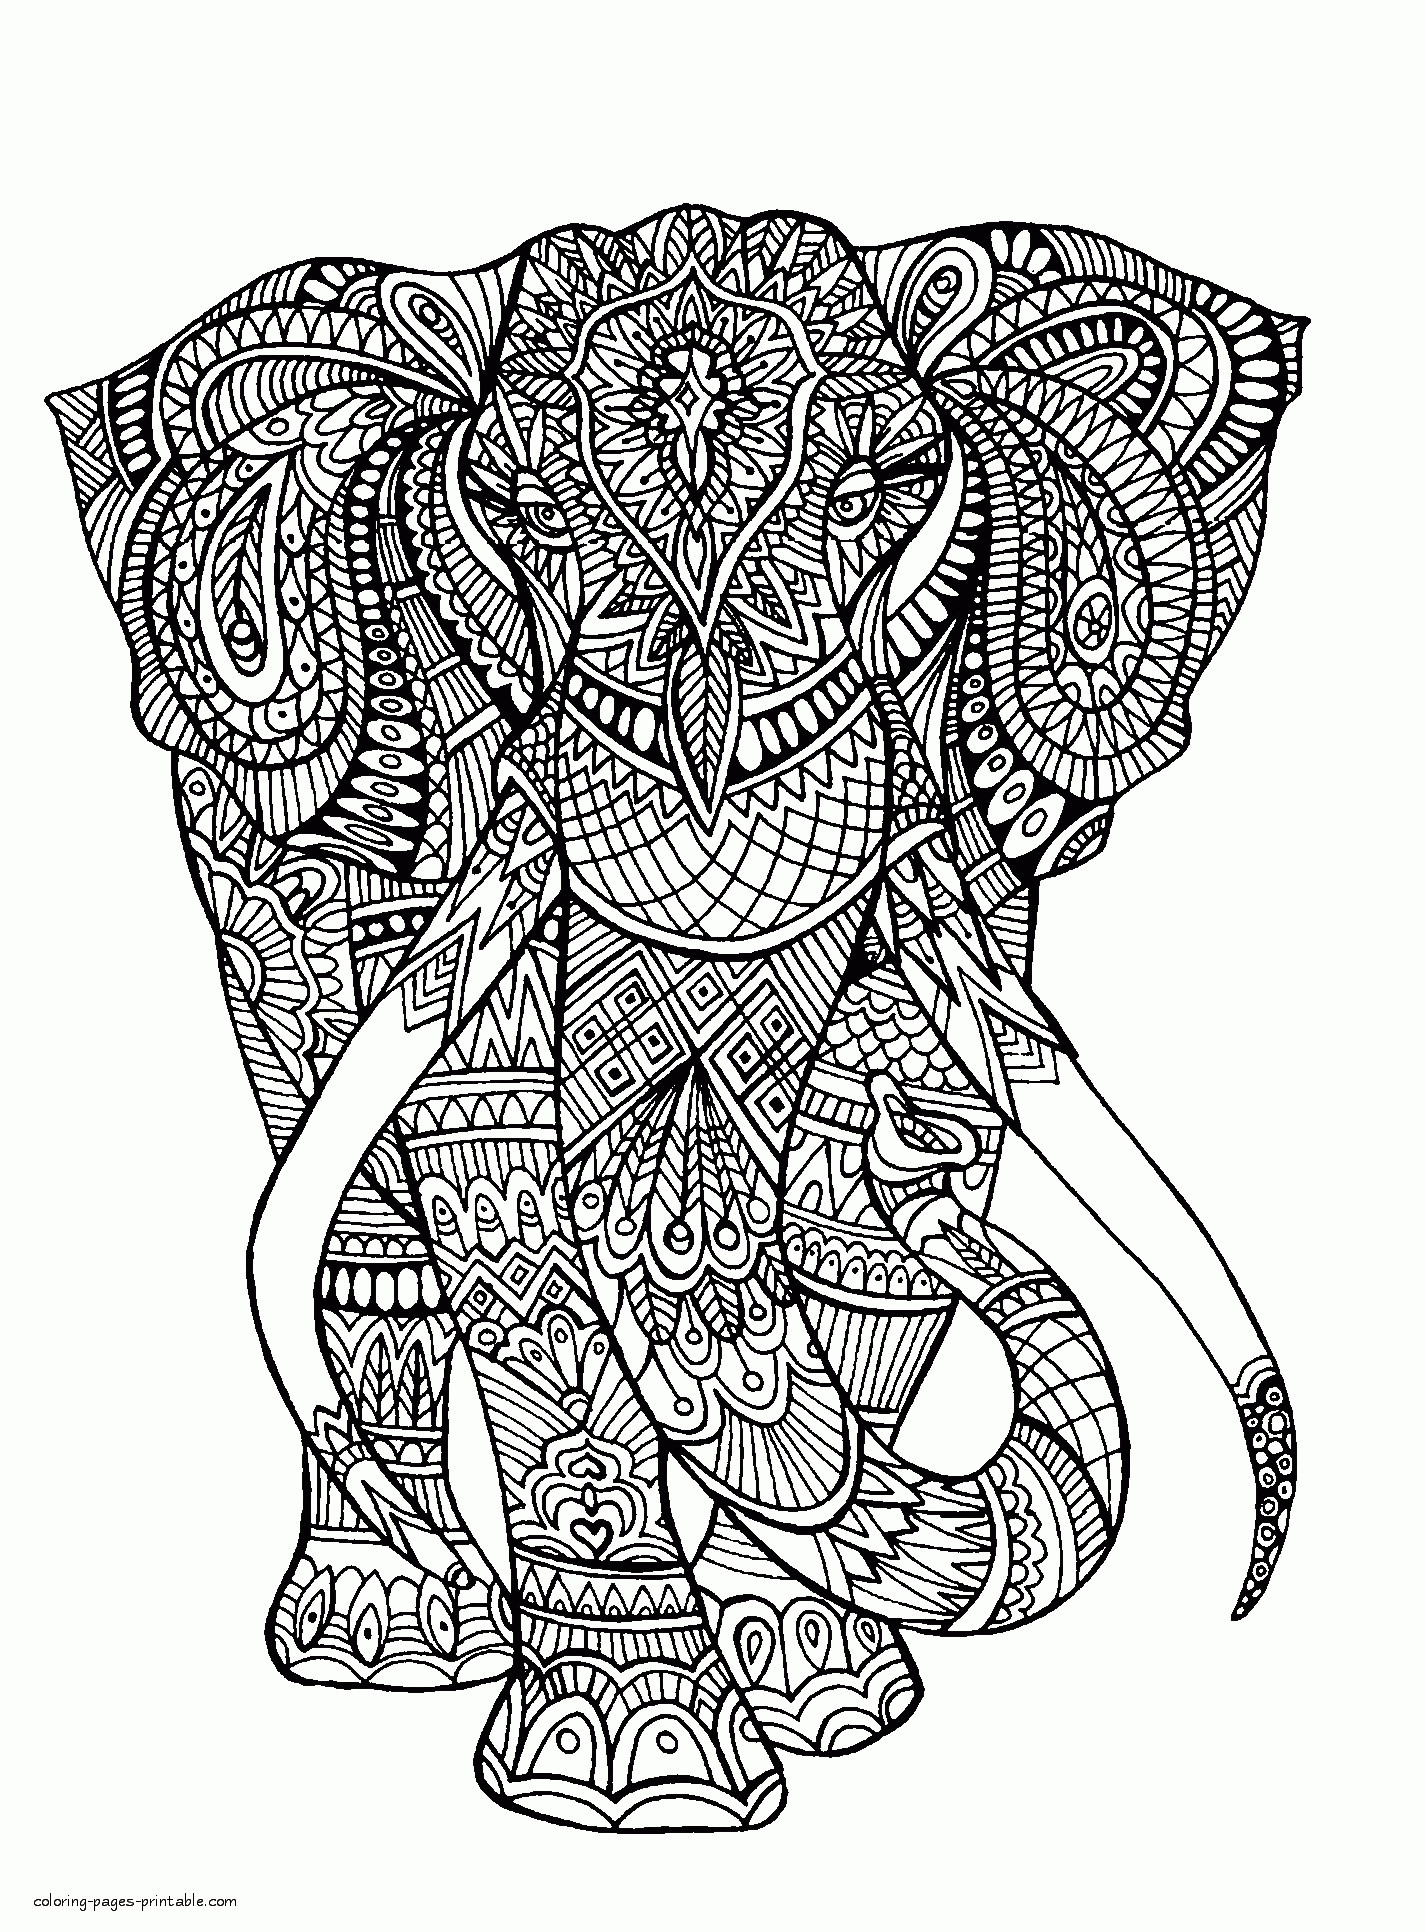 Coloring Pages For Adults Difficult Animals
 Difficult Elephant Colouring Page COLORING PAGES